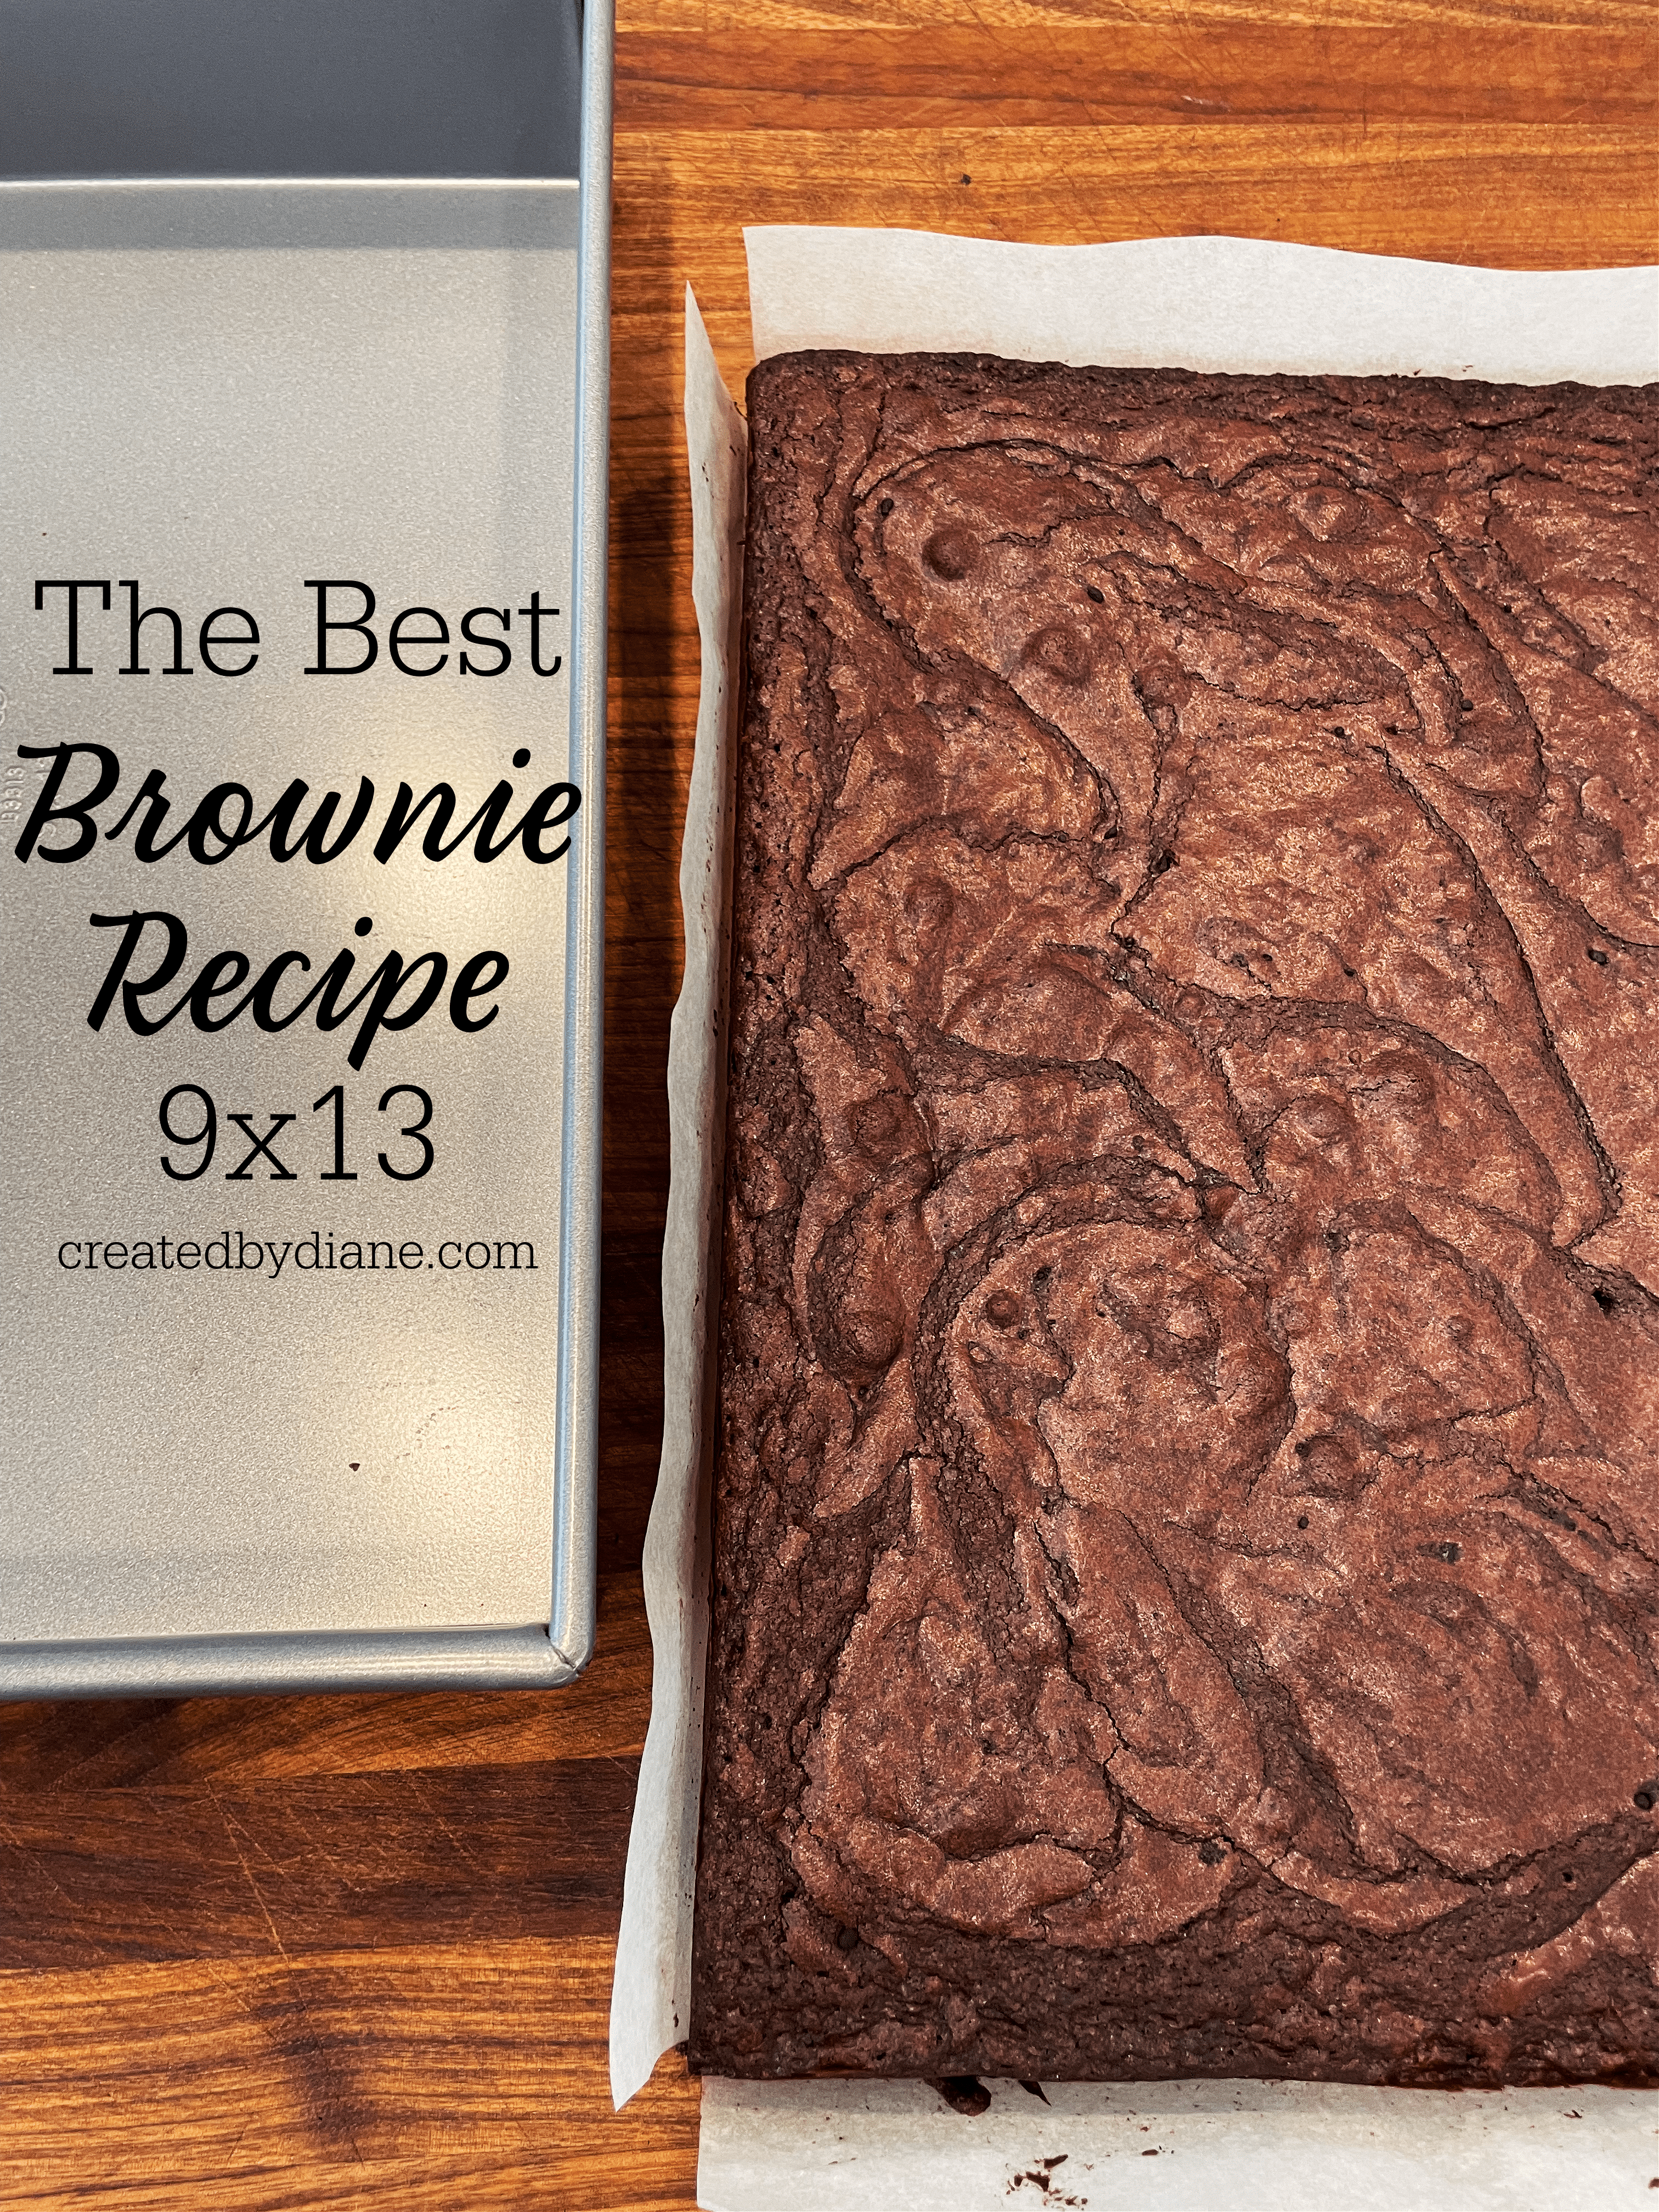 https://www.createdby-diane.com/wp-content/uploads/2022/02/The-Best-Brownie-Recipe-9x13-1.png